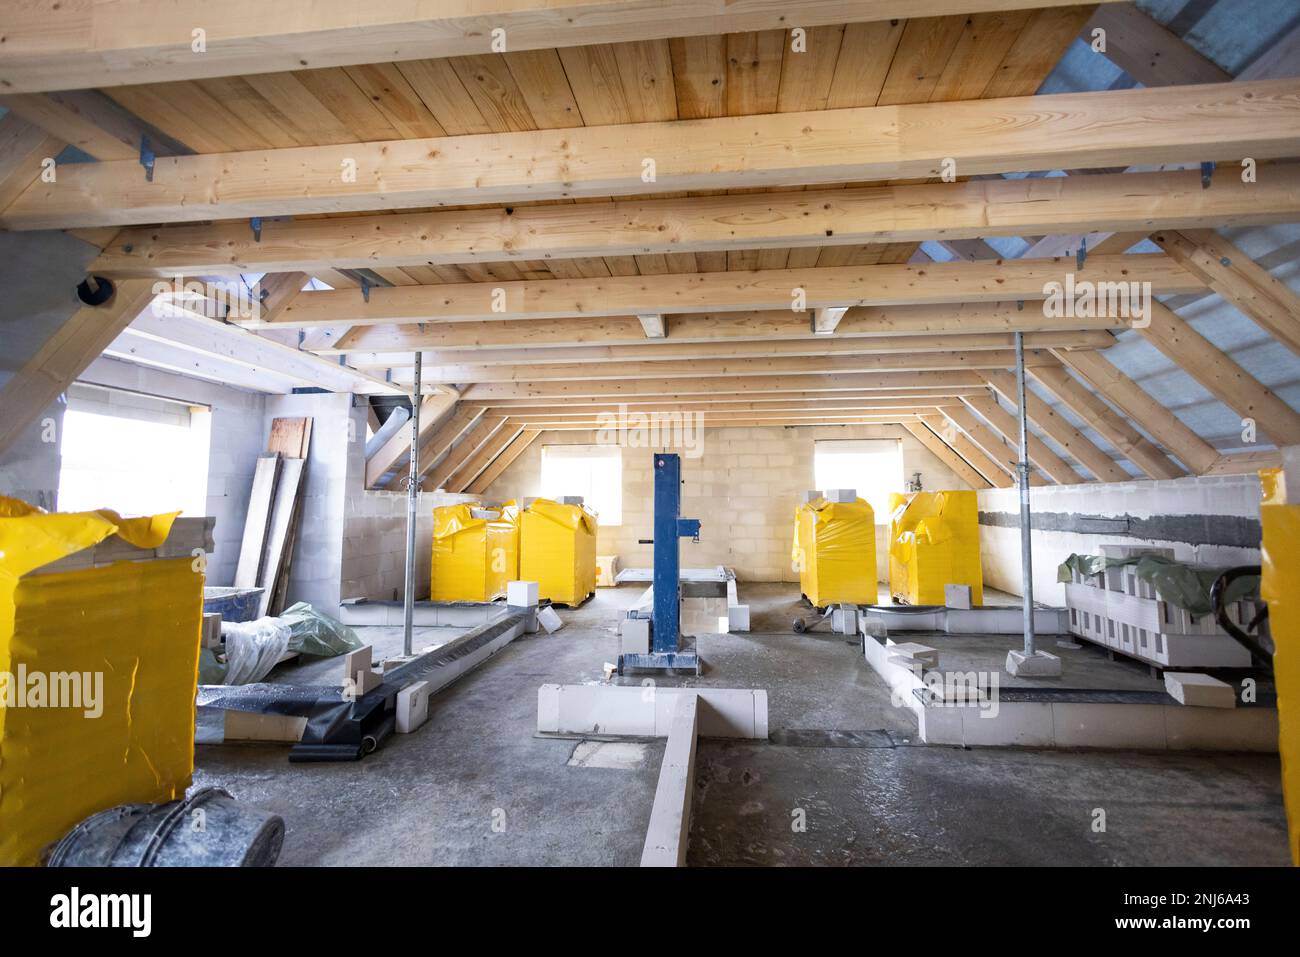 Upper floor with roof beams of a single-family house under construction Stock Photo